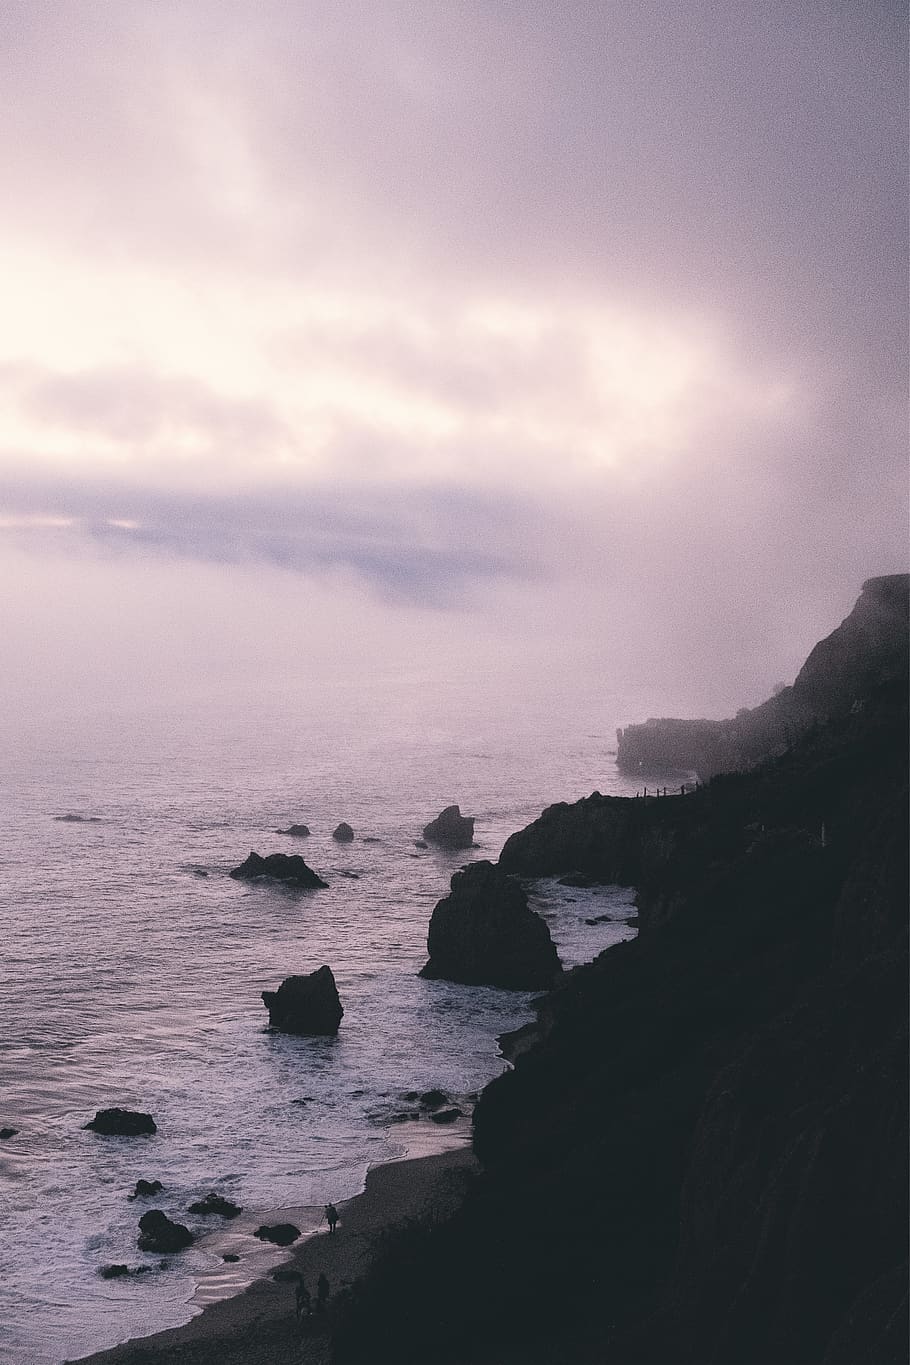 rock formations near sea during foggy weather, promontory, nature